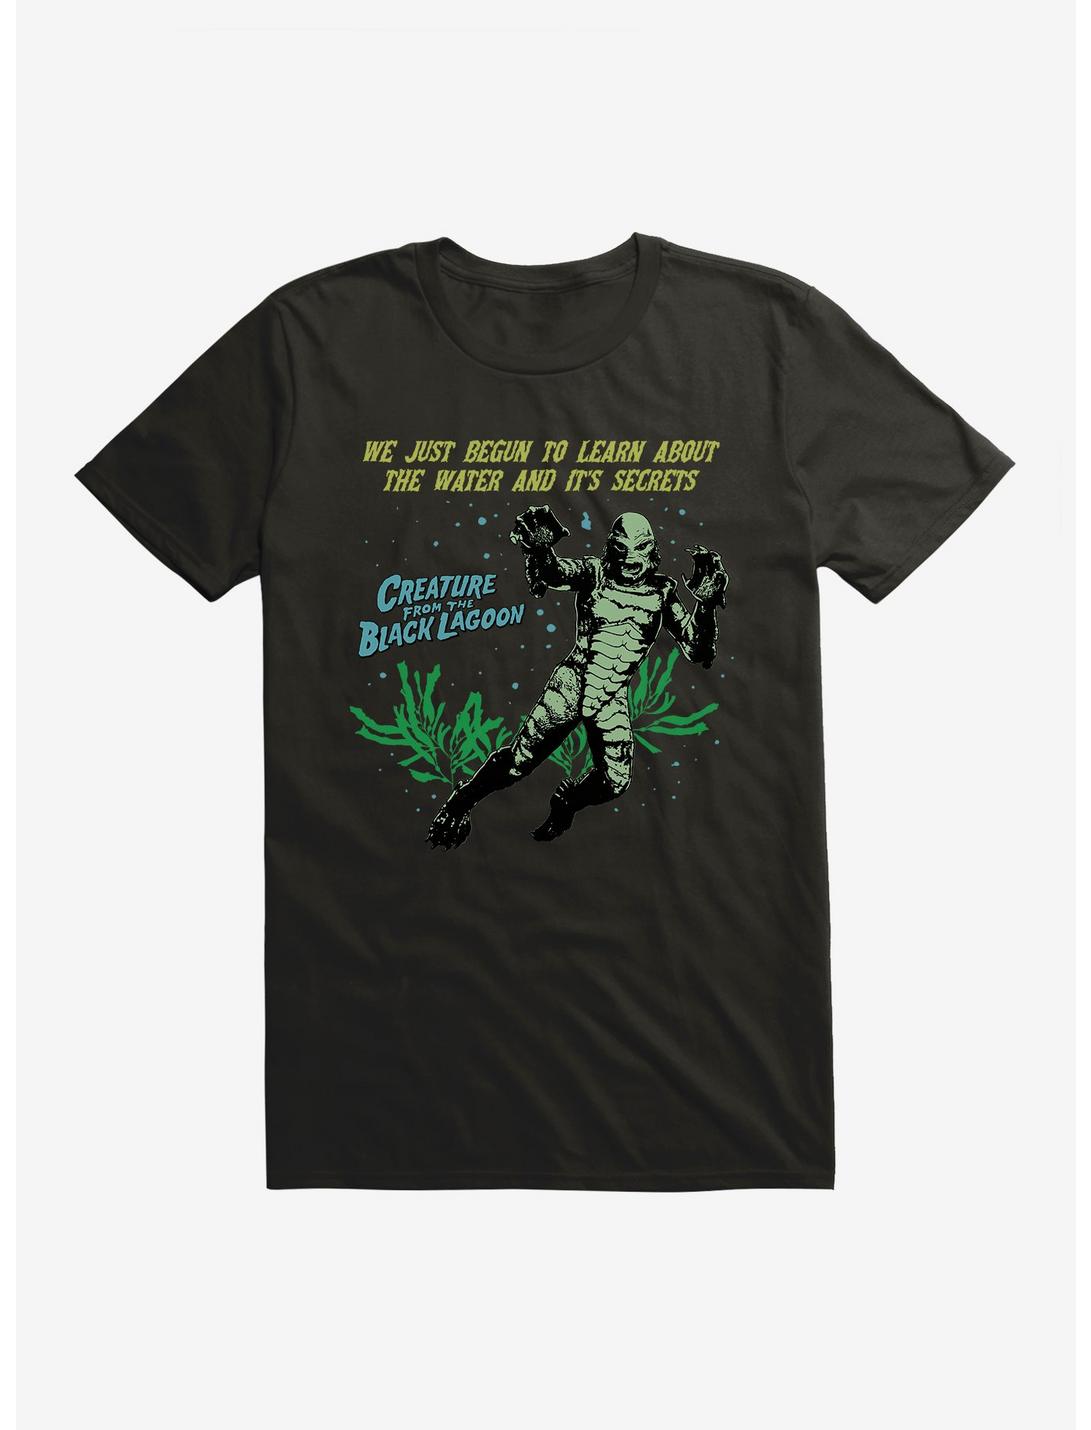 Creature From The Black Lagoon Water And It's Secrets T-Shirt, BLACK, hi-res